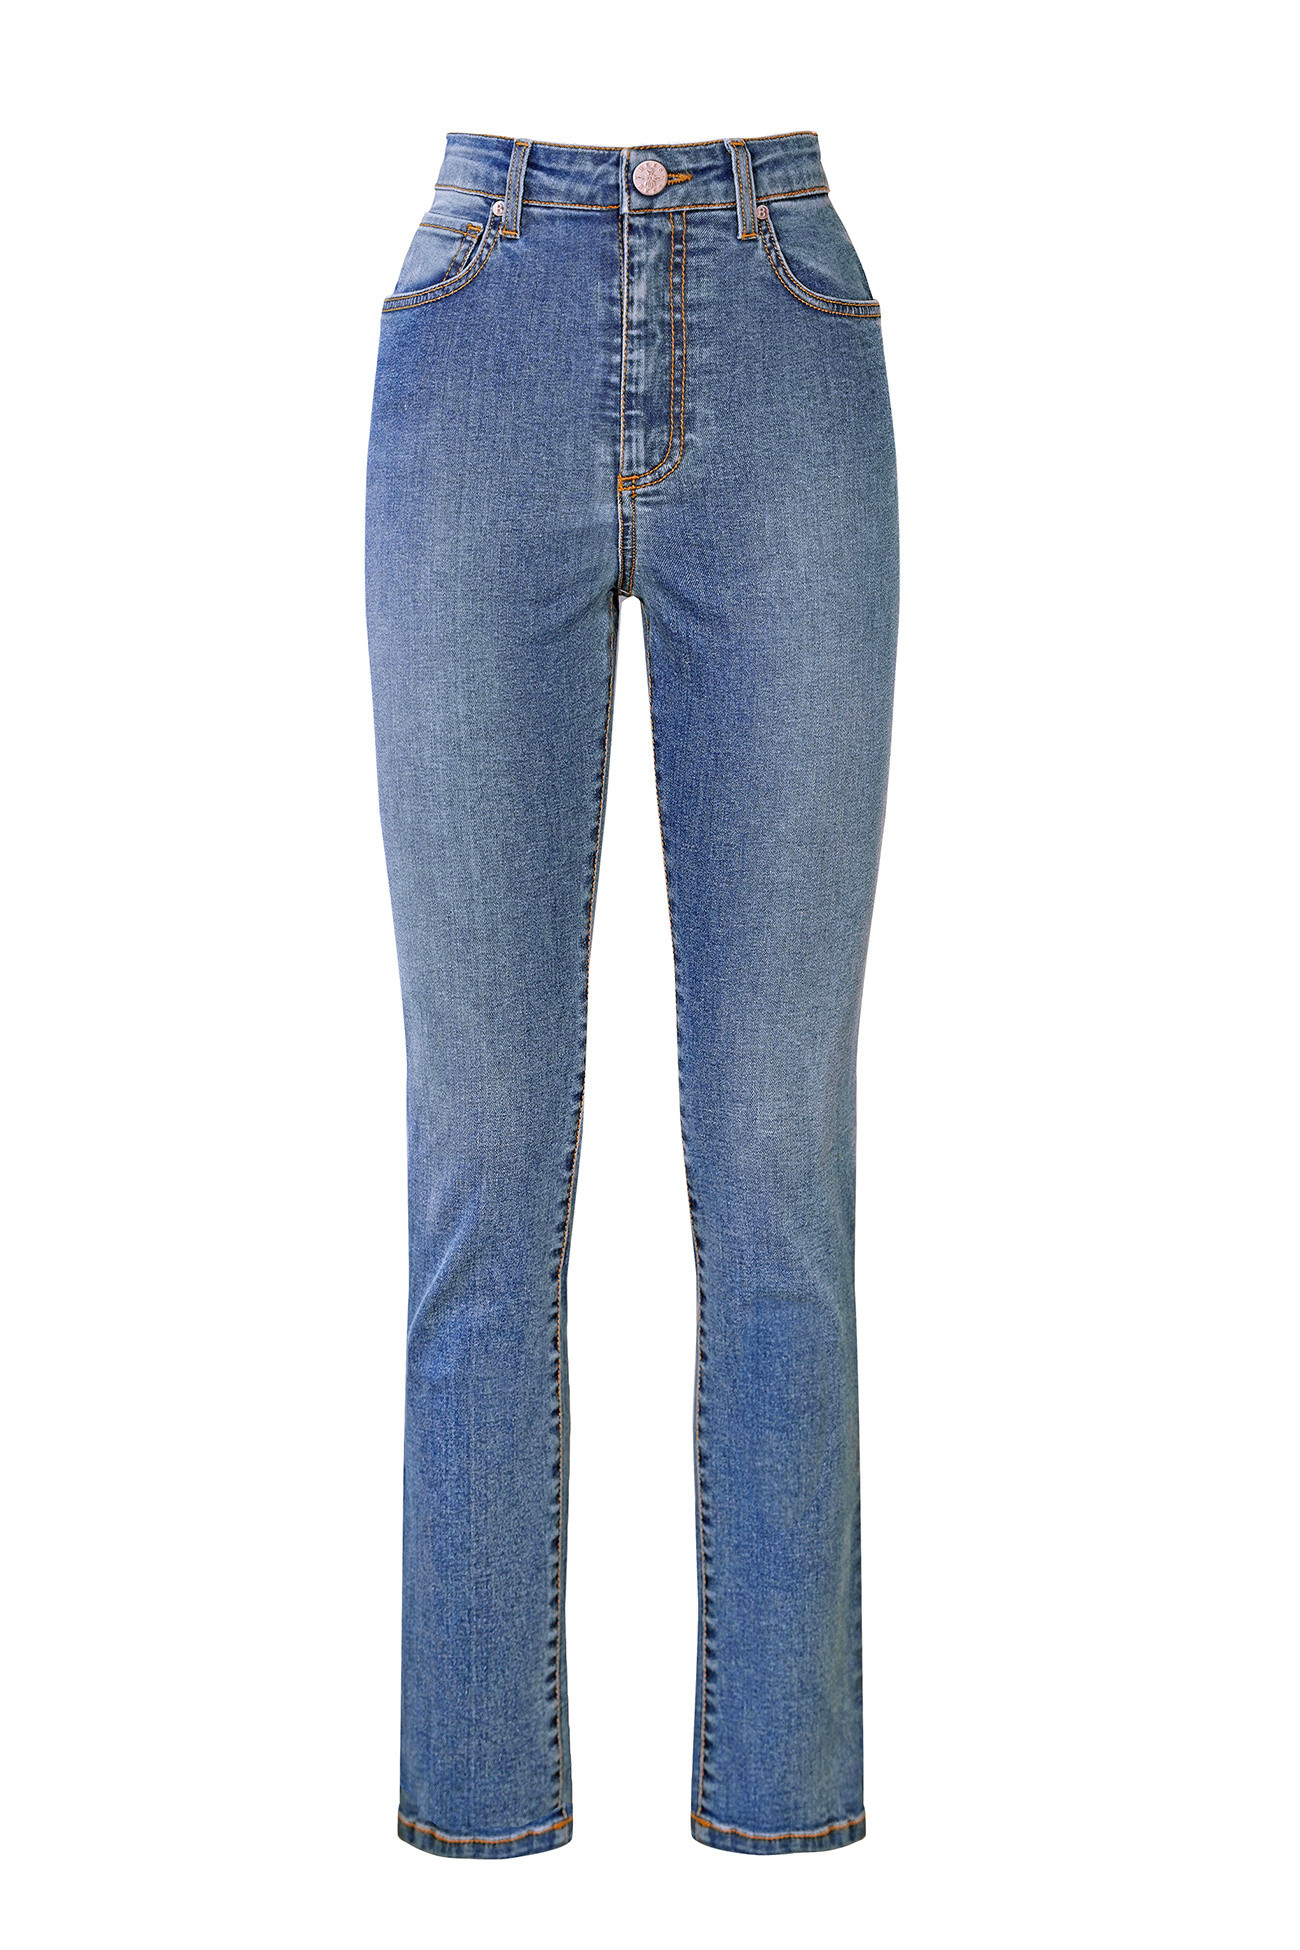 Bees - Iconic Jeans with bow, Denim, large image number 0